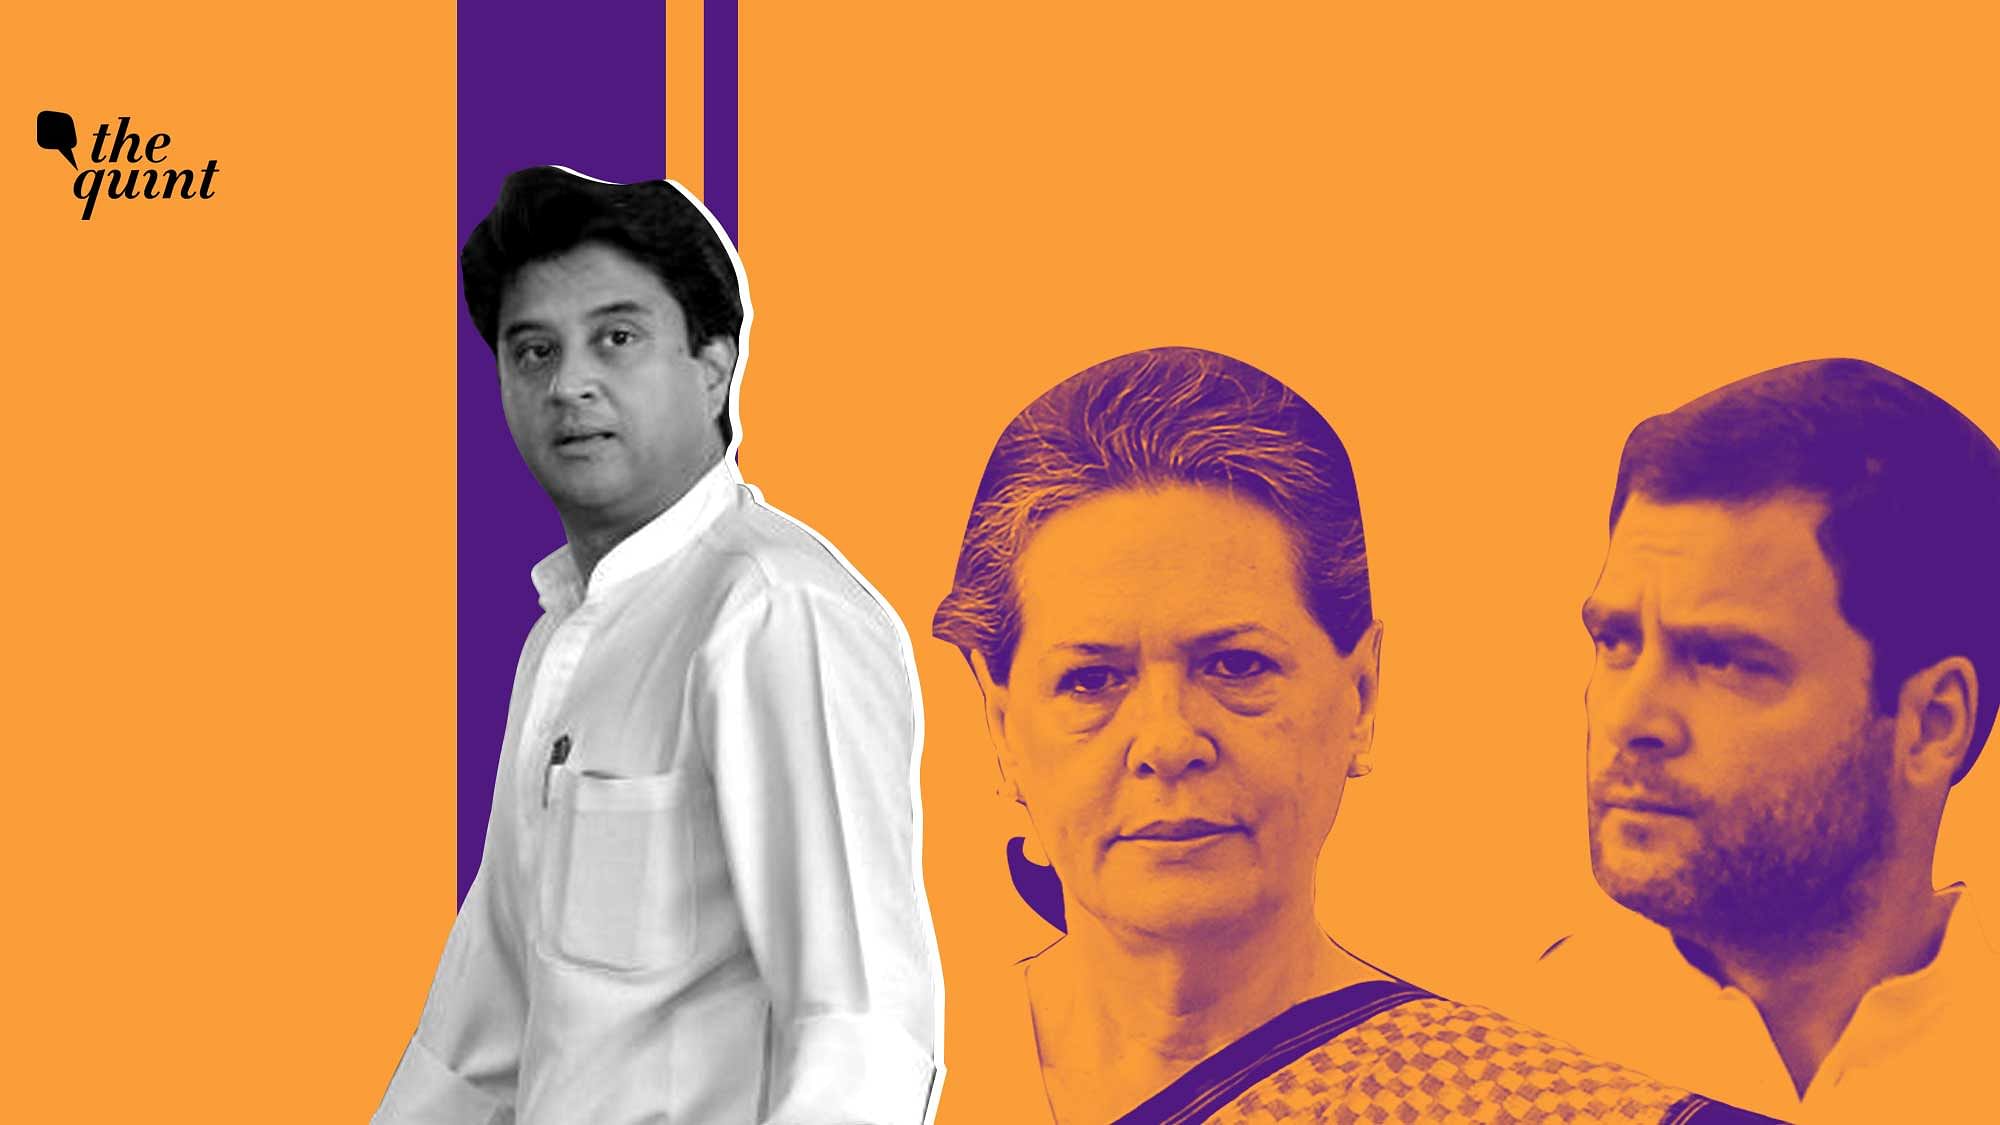 Was Jyotiraditya Scindia blackmailing the Gandhis that he would “reveal” damning information about them if he’s not given the Rajya Sabha seat and the Madhya Pradesh Congress Committee president position?